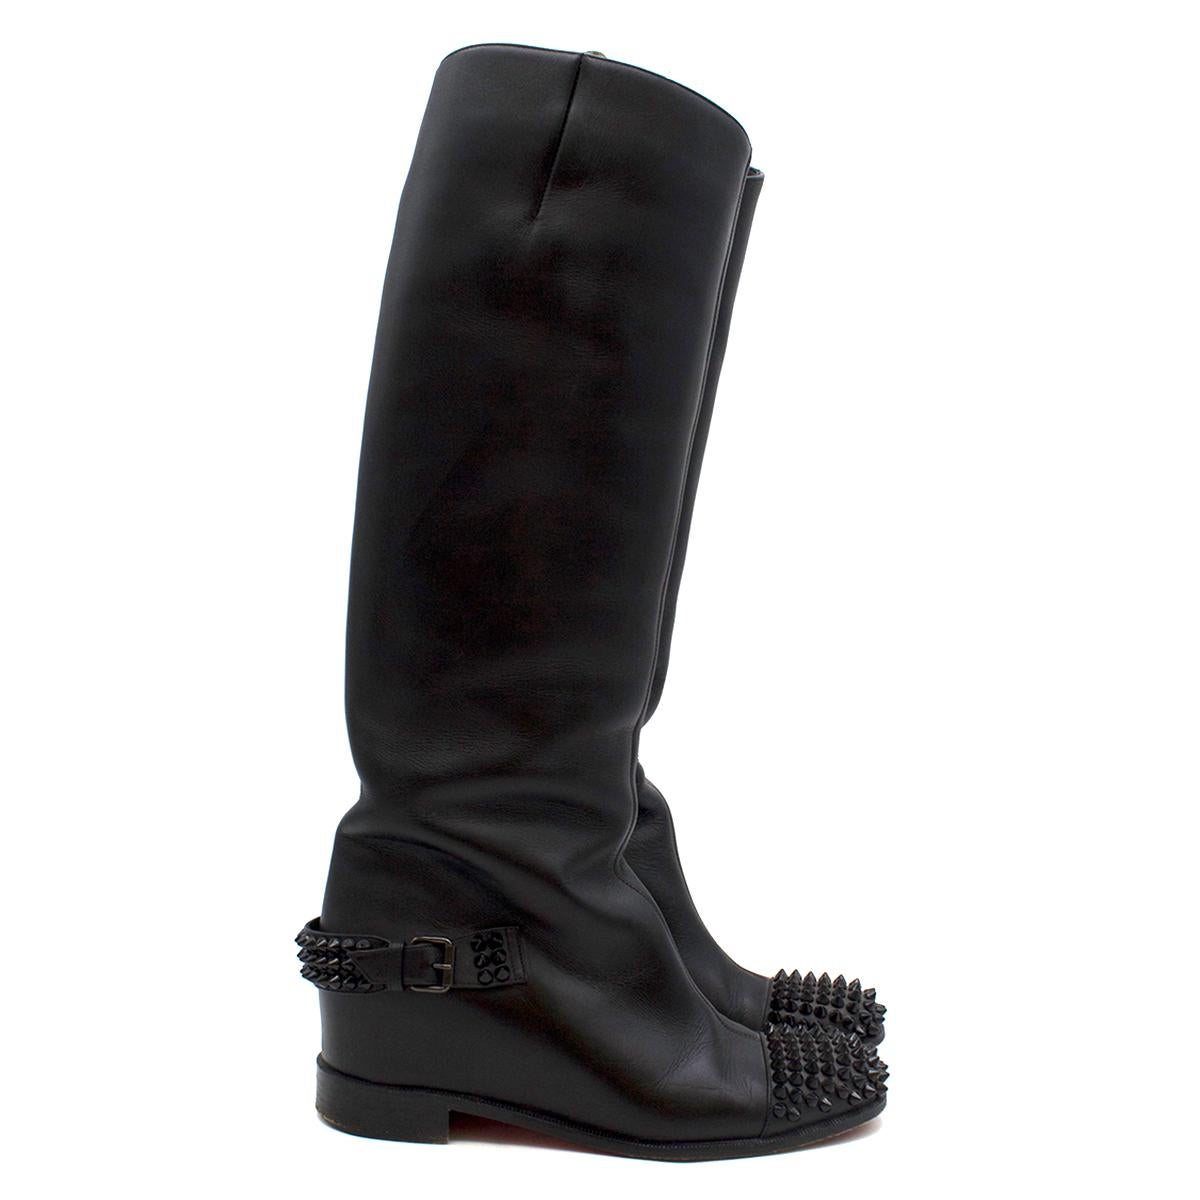 Christian Louboutin Egoutina studded leather boots

- Black leather boots
- Knee length
- Round toe
- Stud embellishing to the toe and heel
- Pull on

Please note, these items are pre-owned and may show some signs of storage, even when unworn and